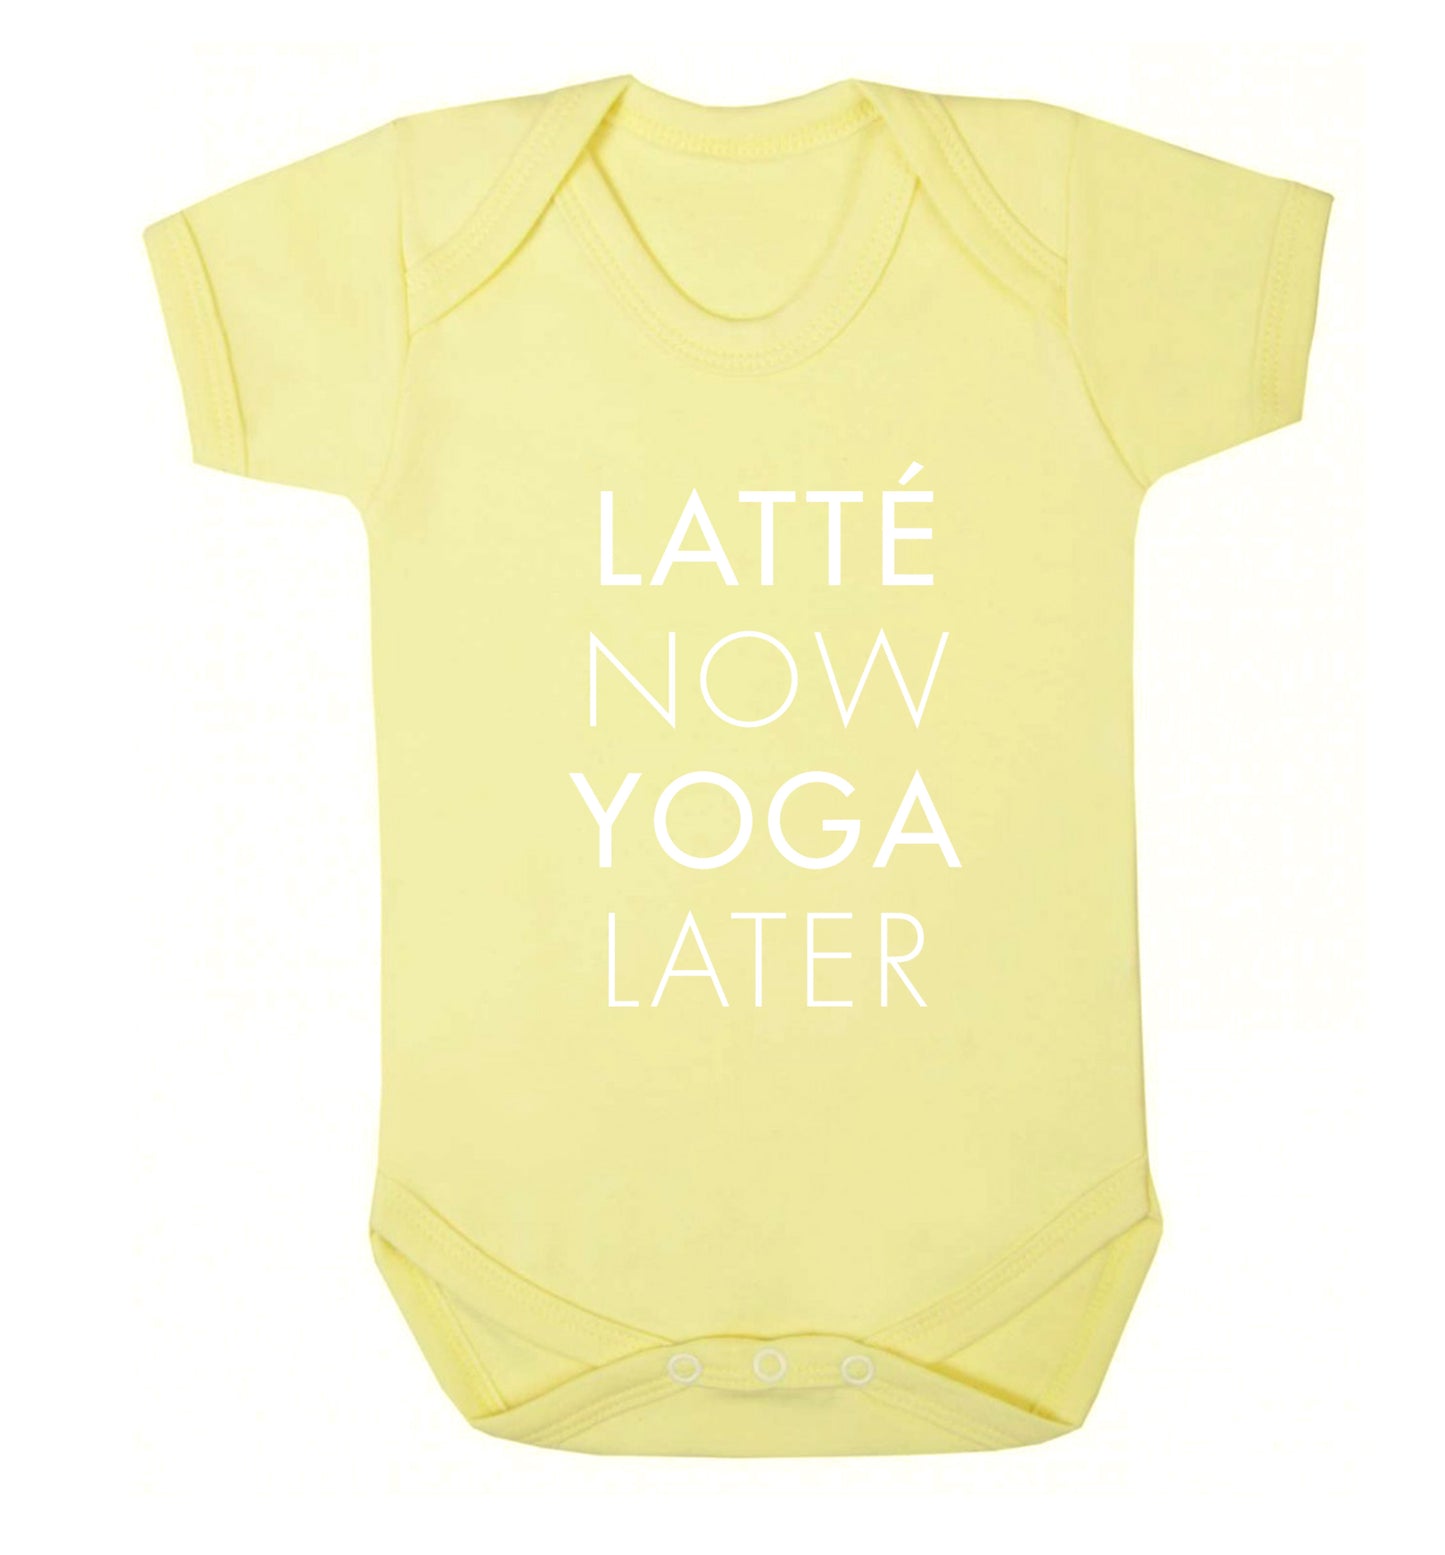 Latte now yoga later Baby Vest pale yellow 18-24 months